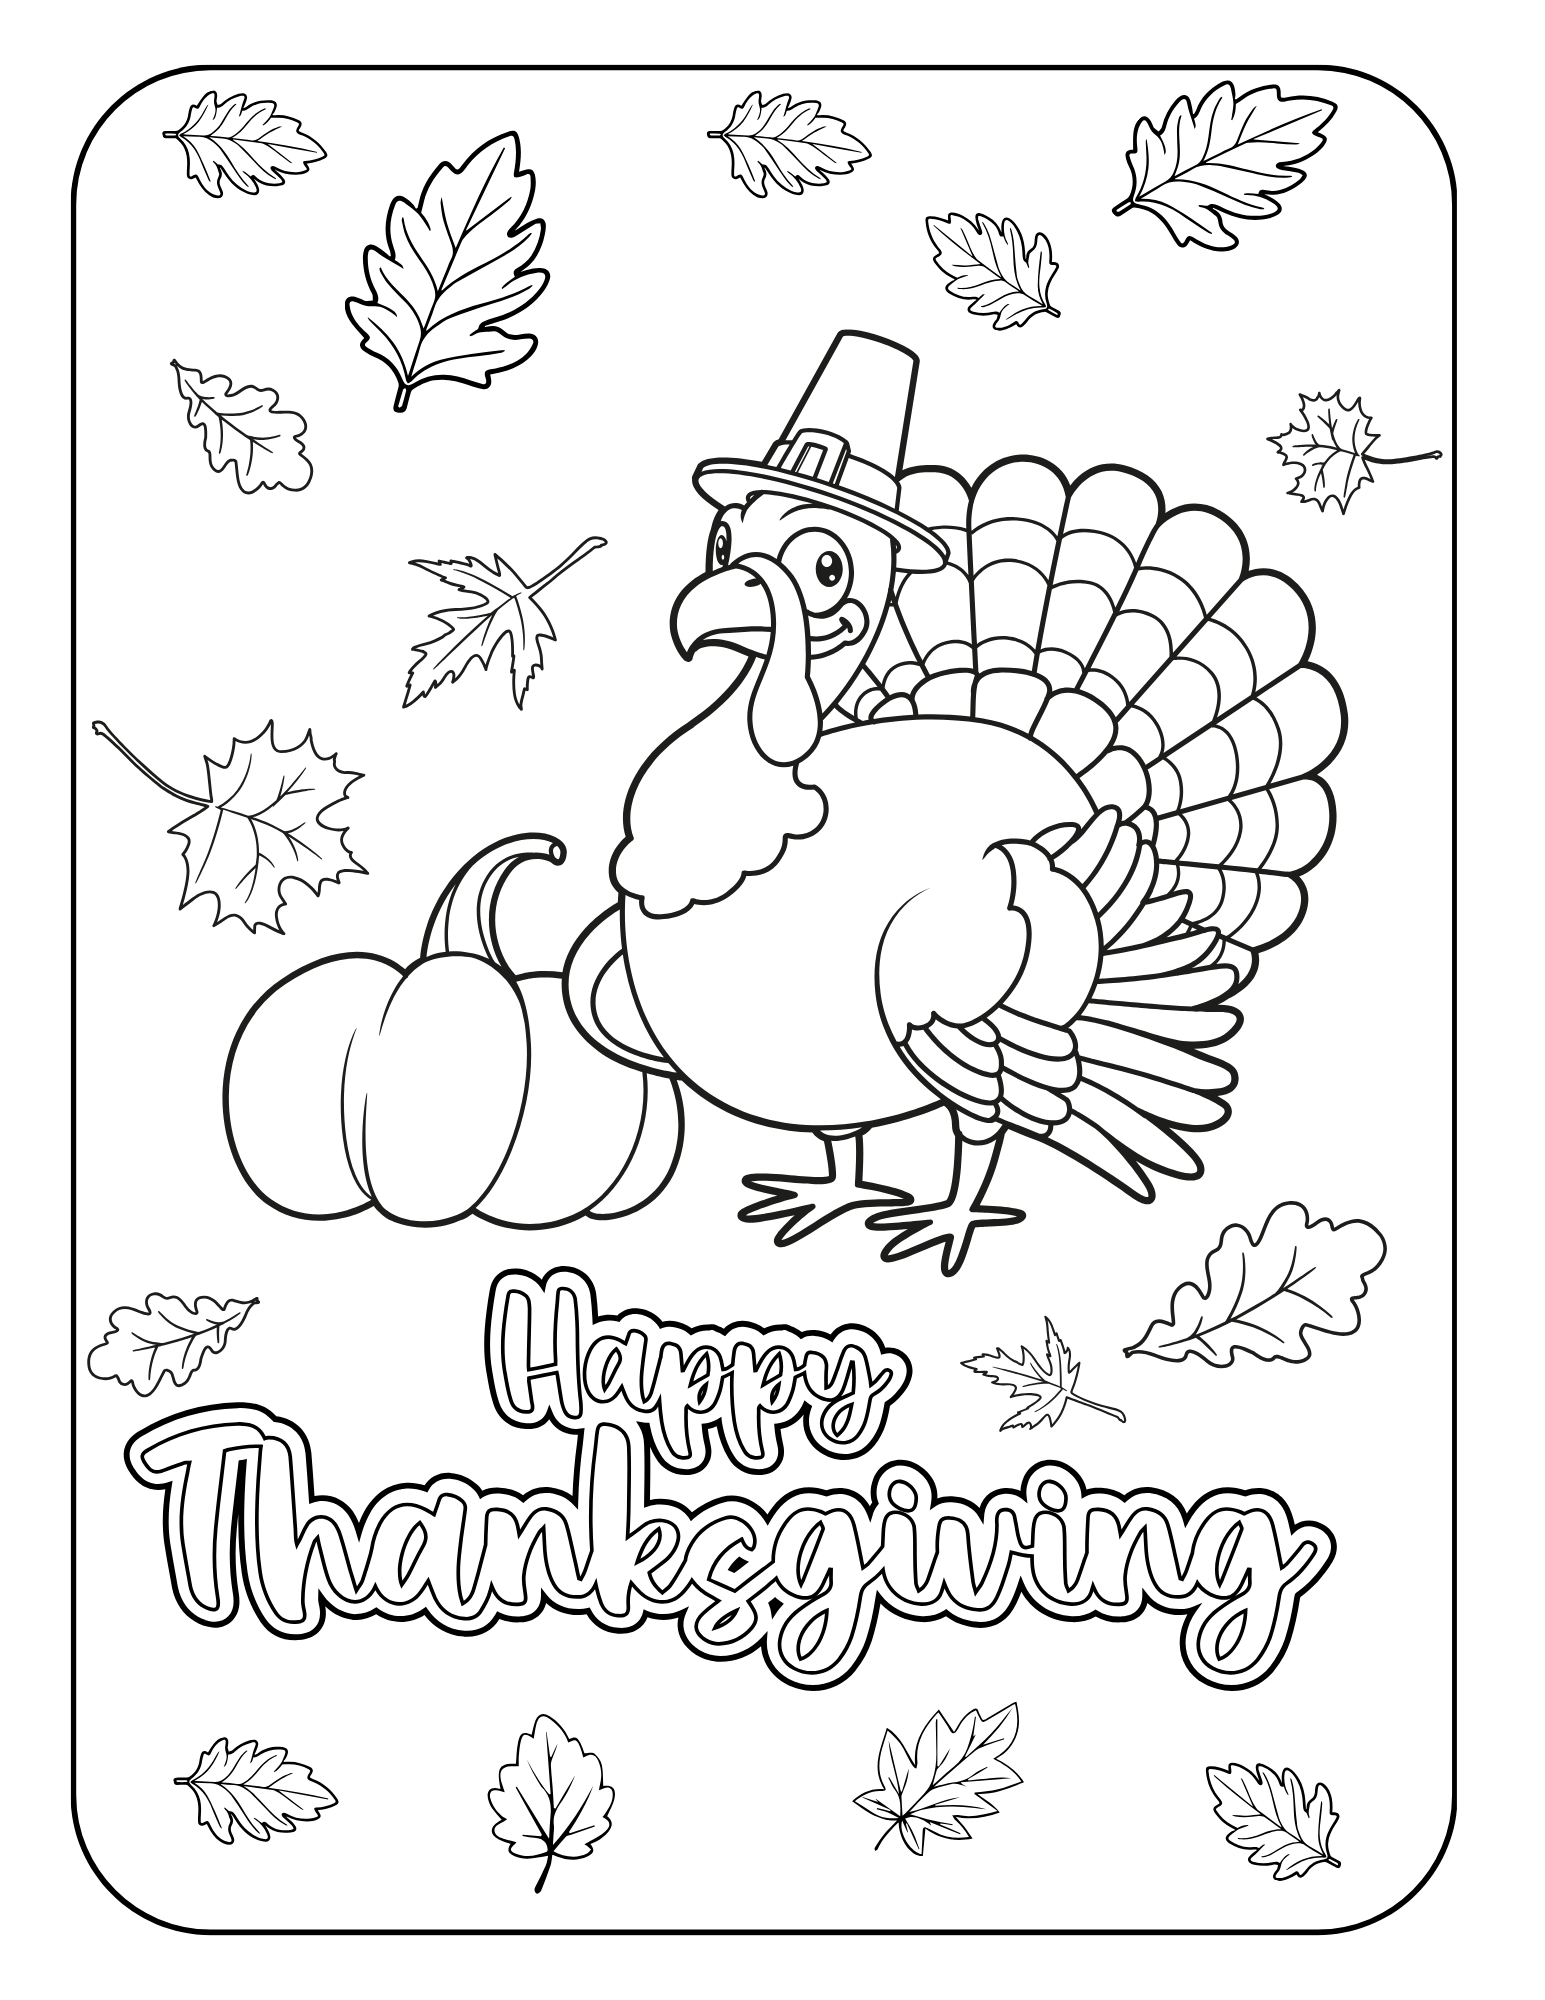 Cute thanksgiving coloring pages for kids and adults